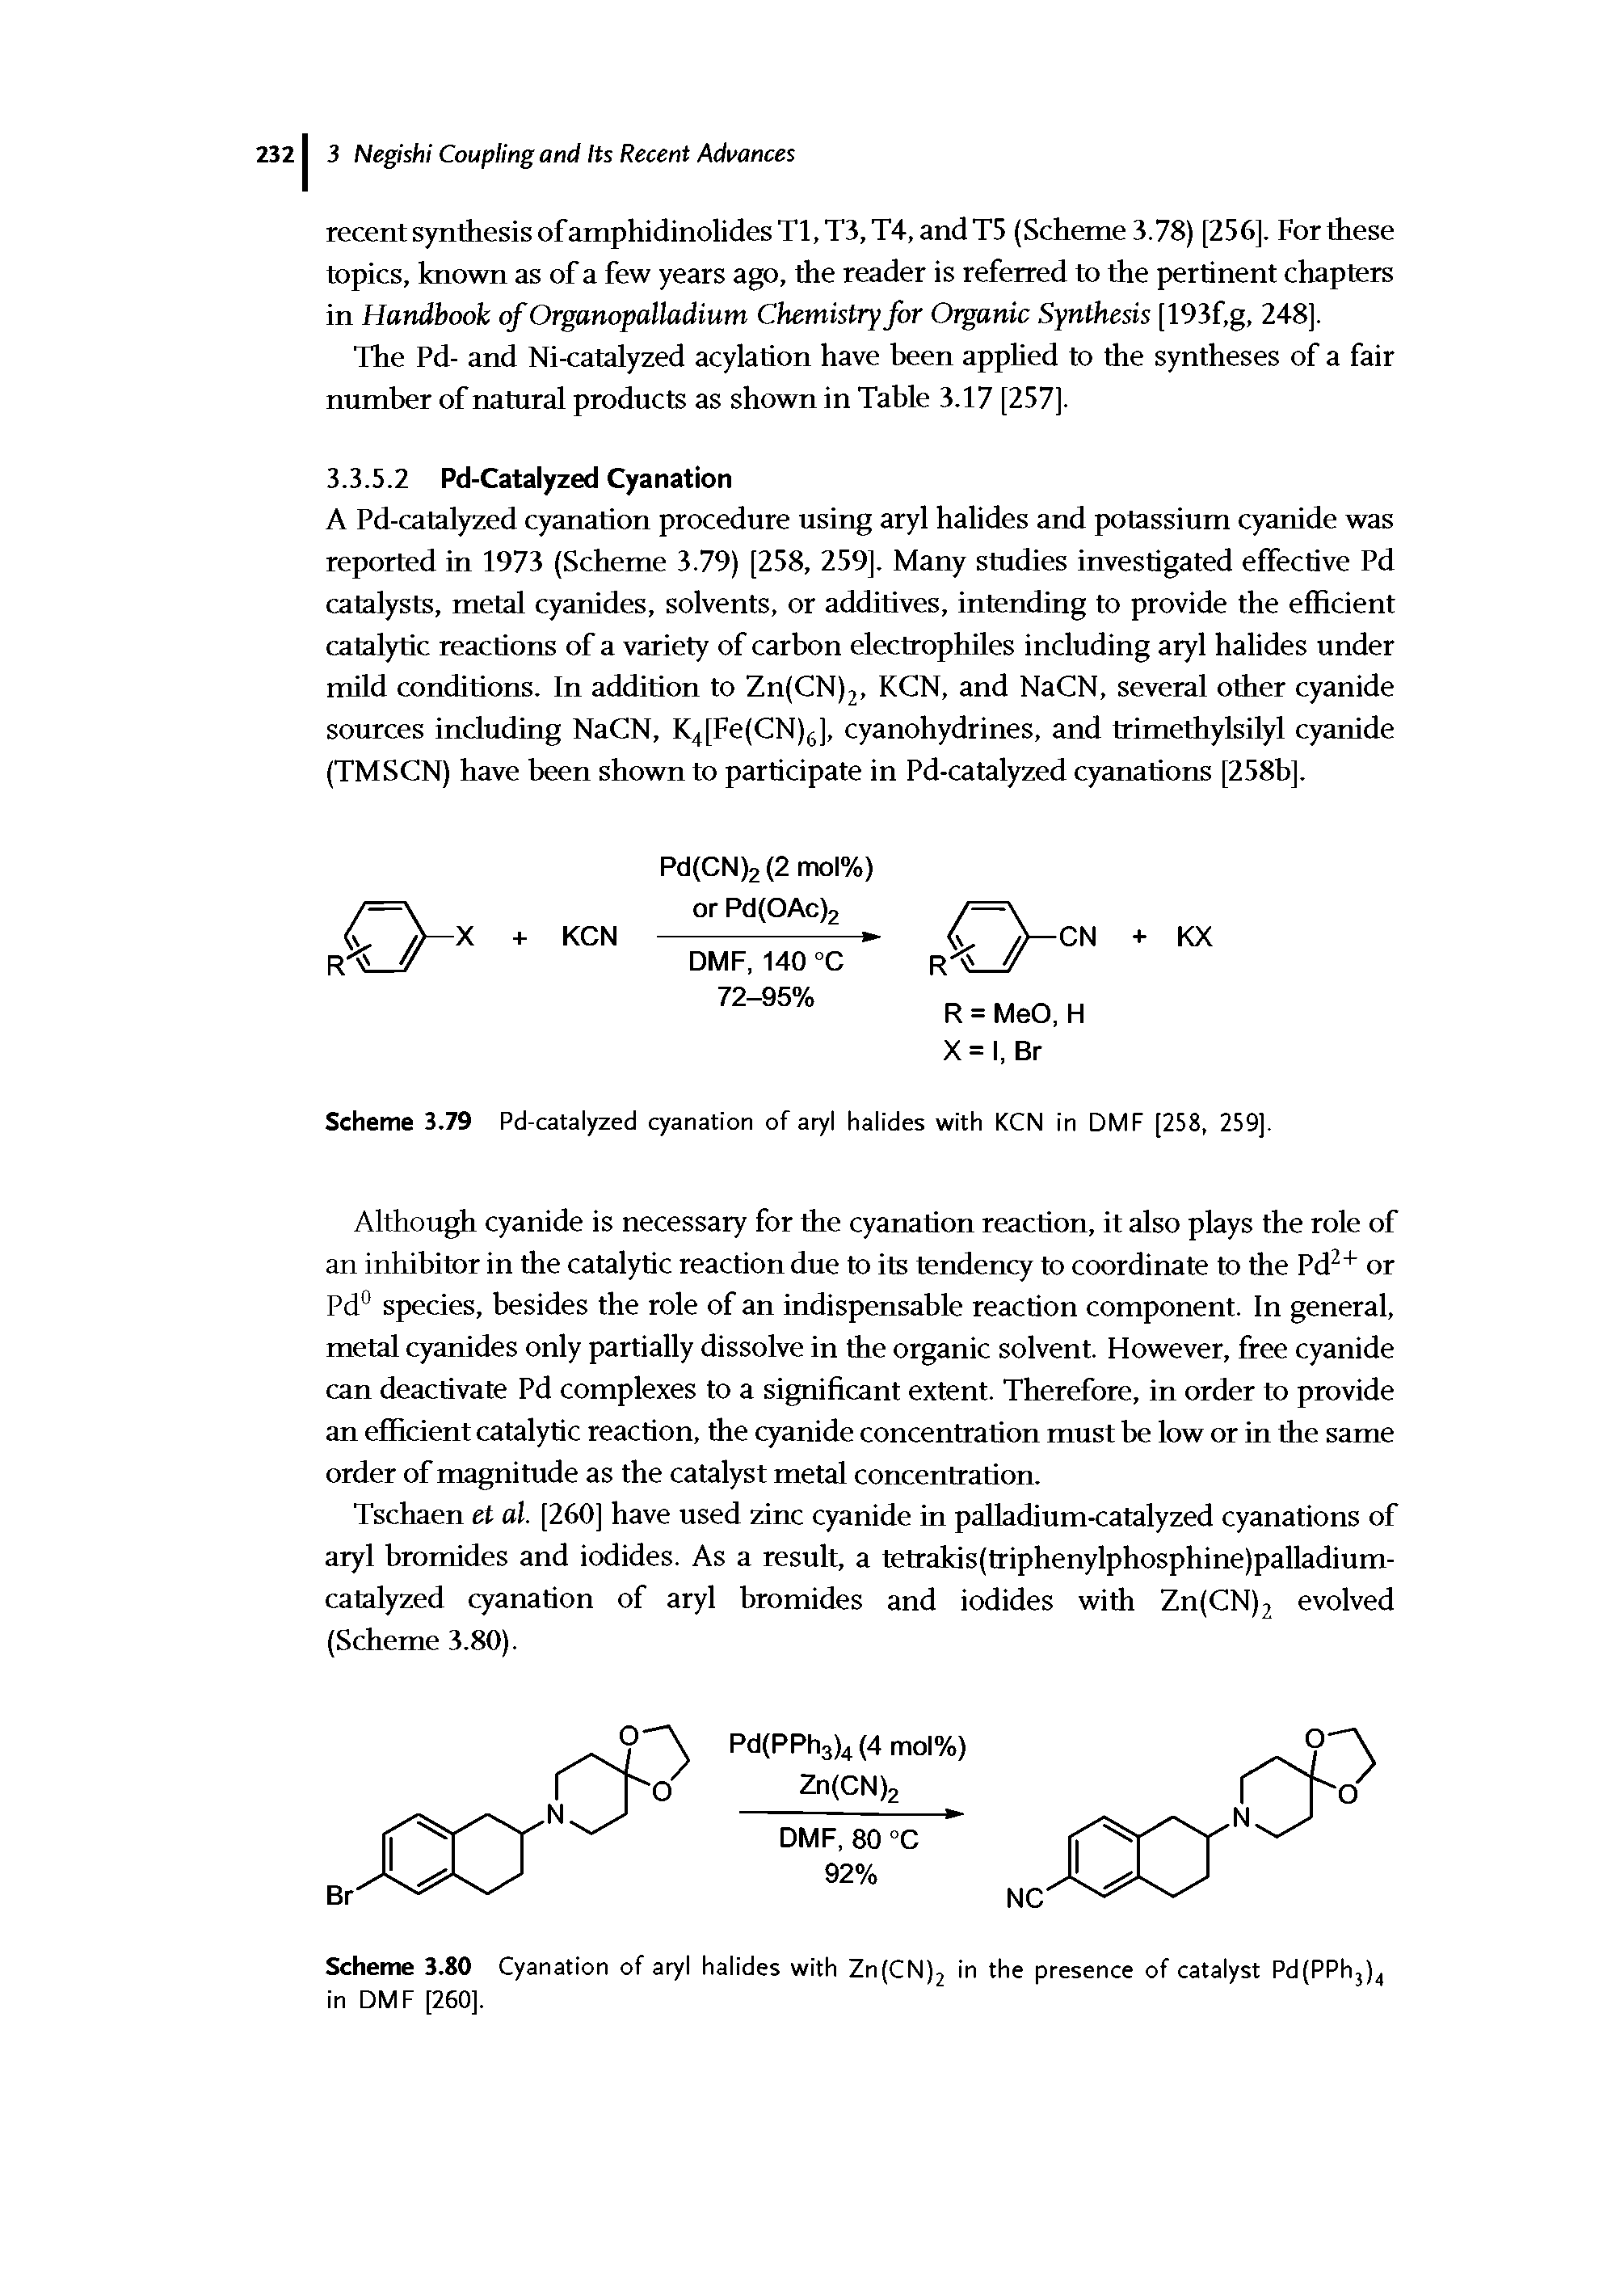 Scheme 3.79 Pd-catalyzed cyanation of aryl halides with KCN in DMF [258, 259].